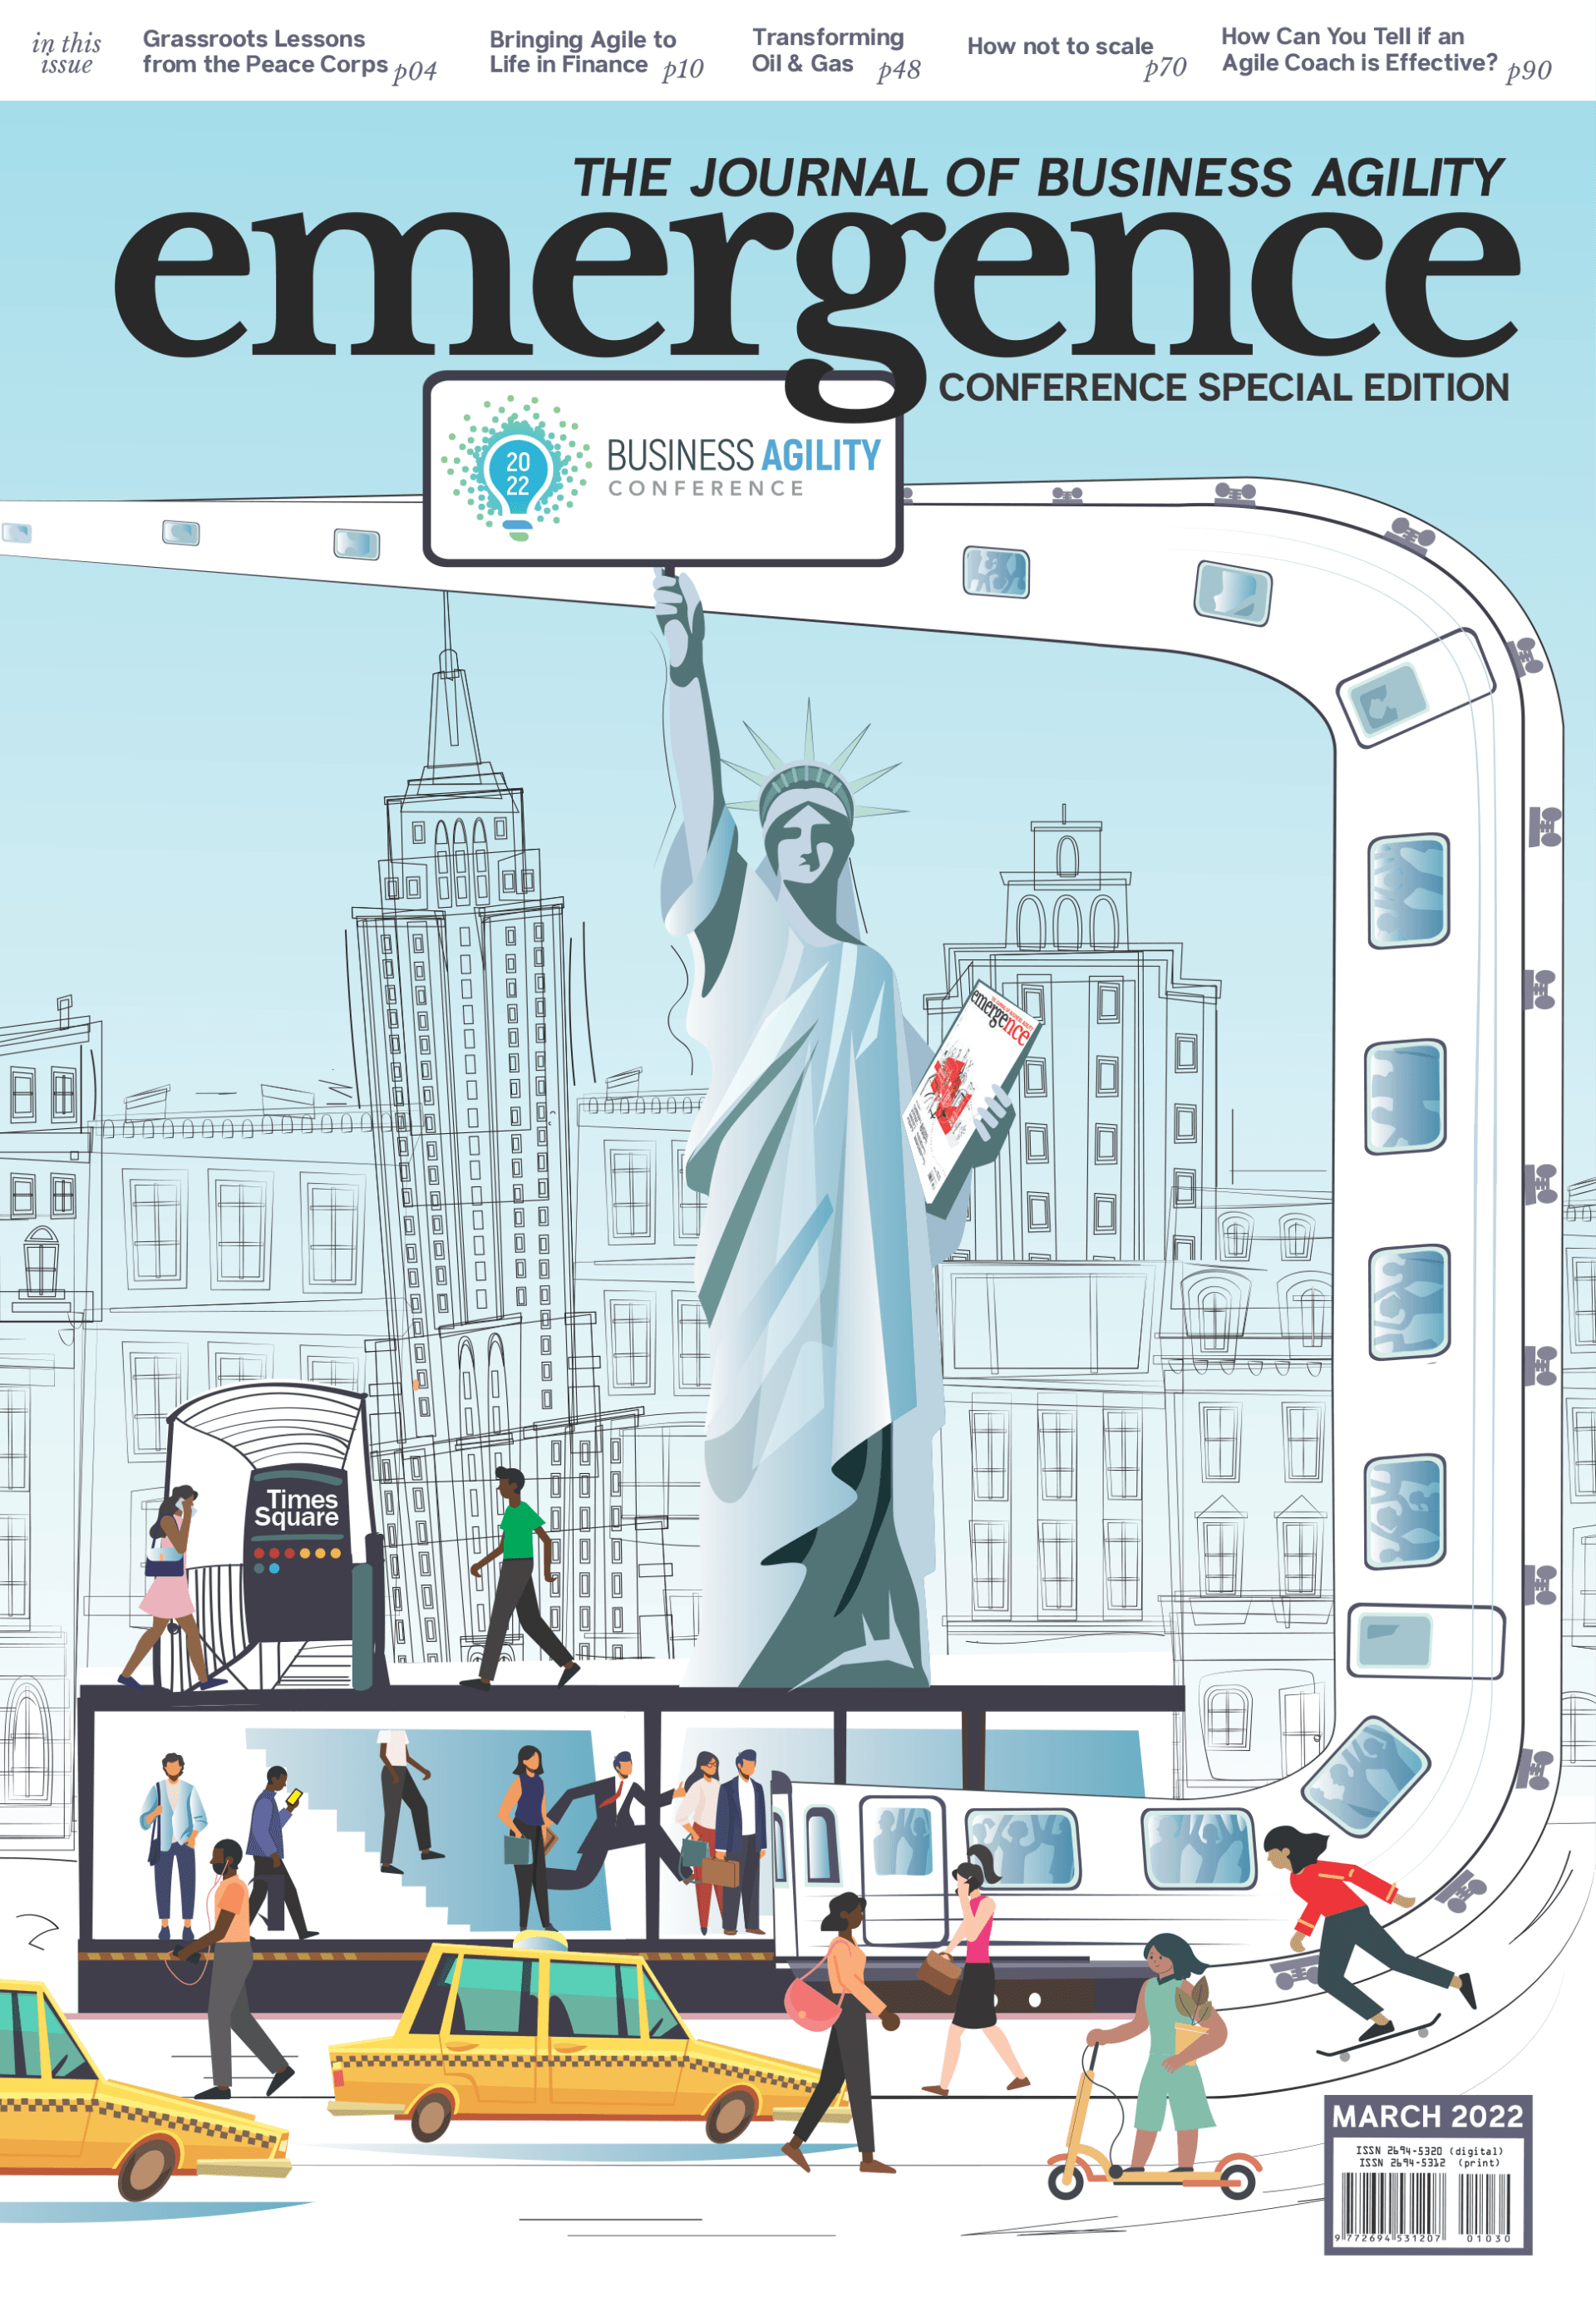 The cover of the March 2022 edition of Emergence, featuring the statue of liberty and other prominent new york landmarks